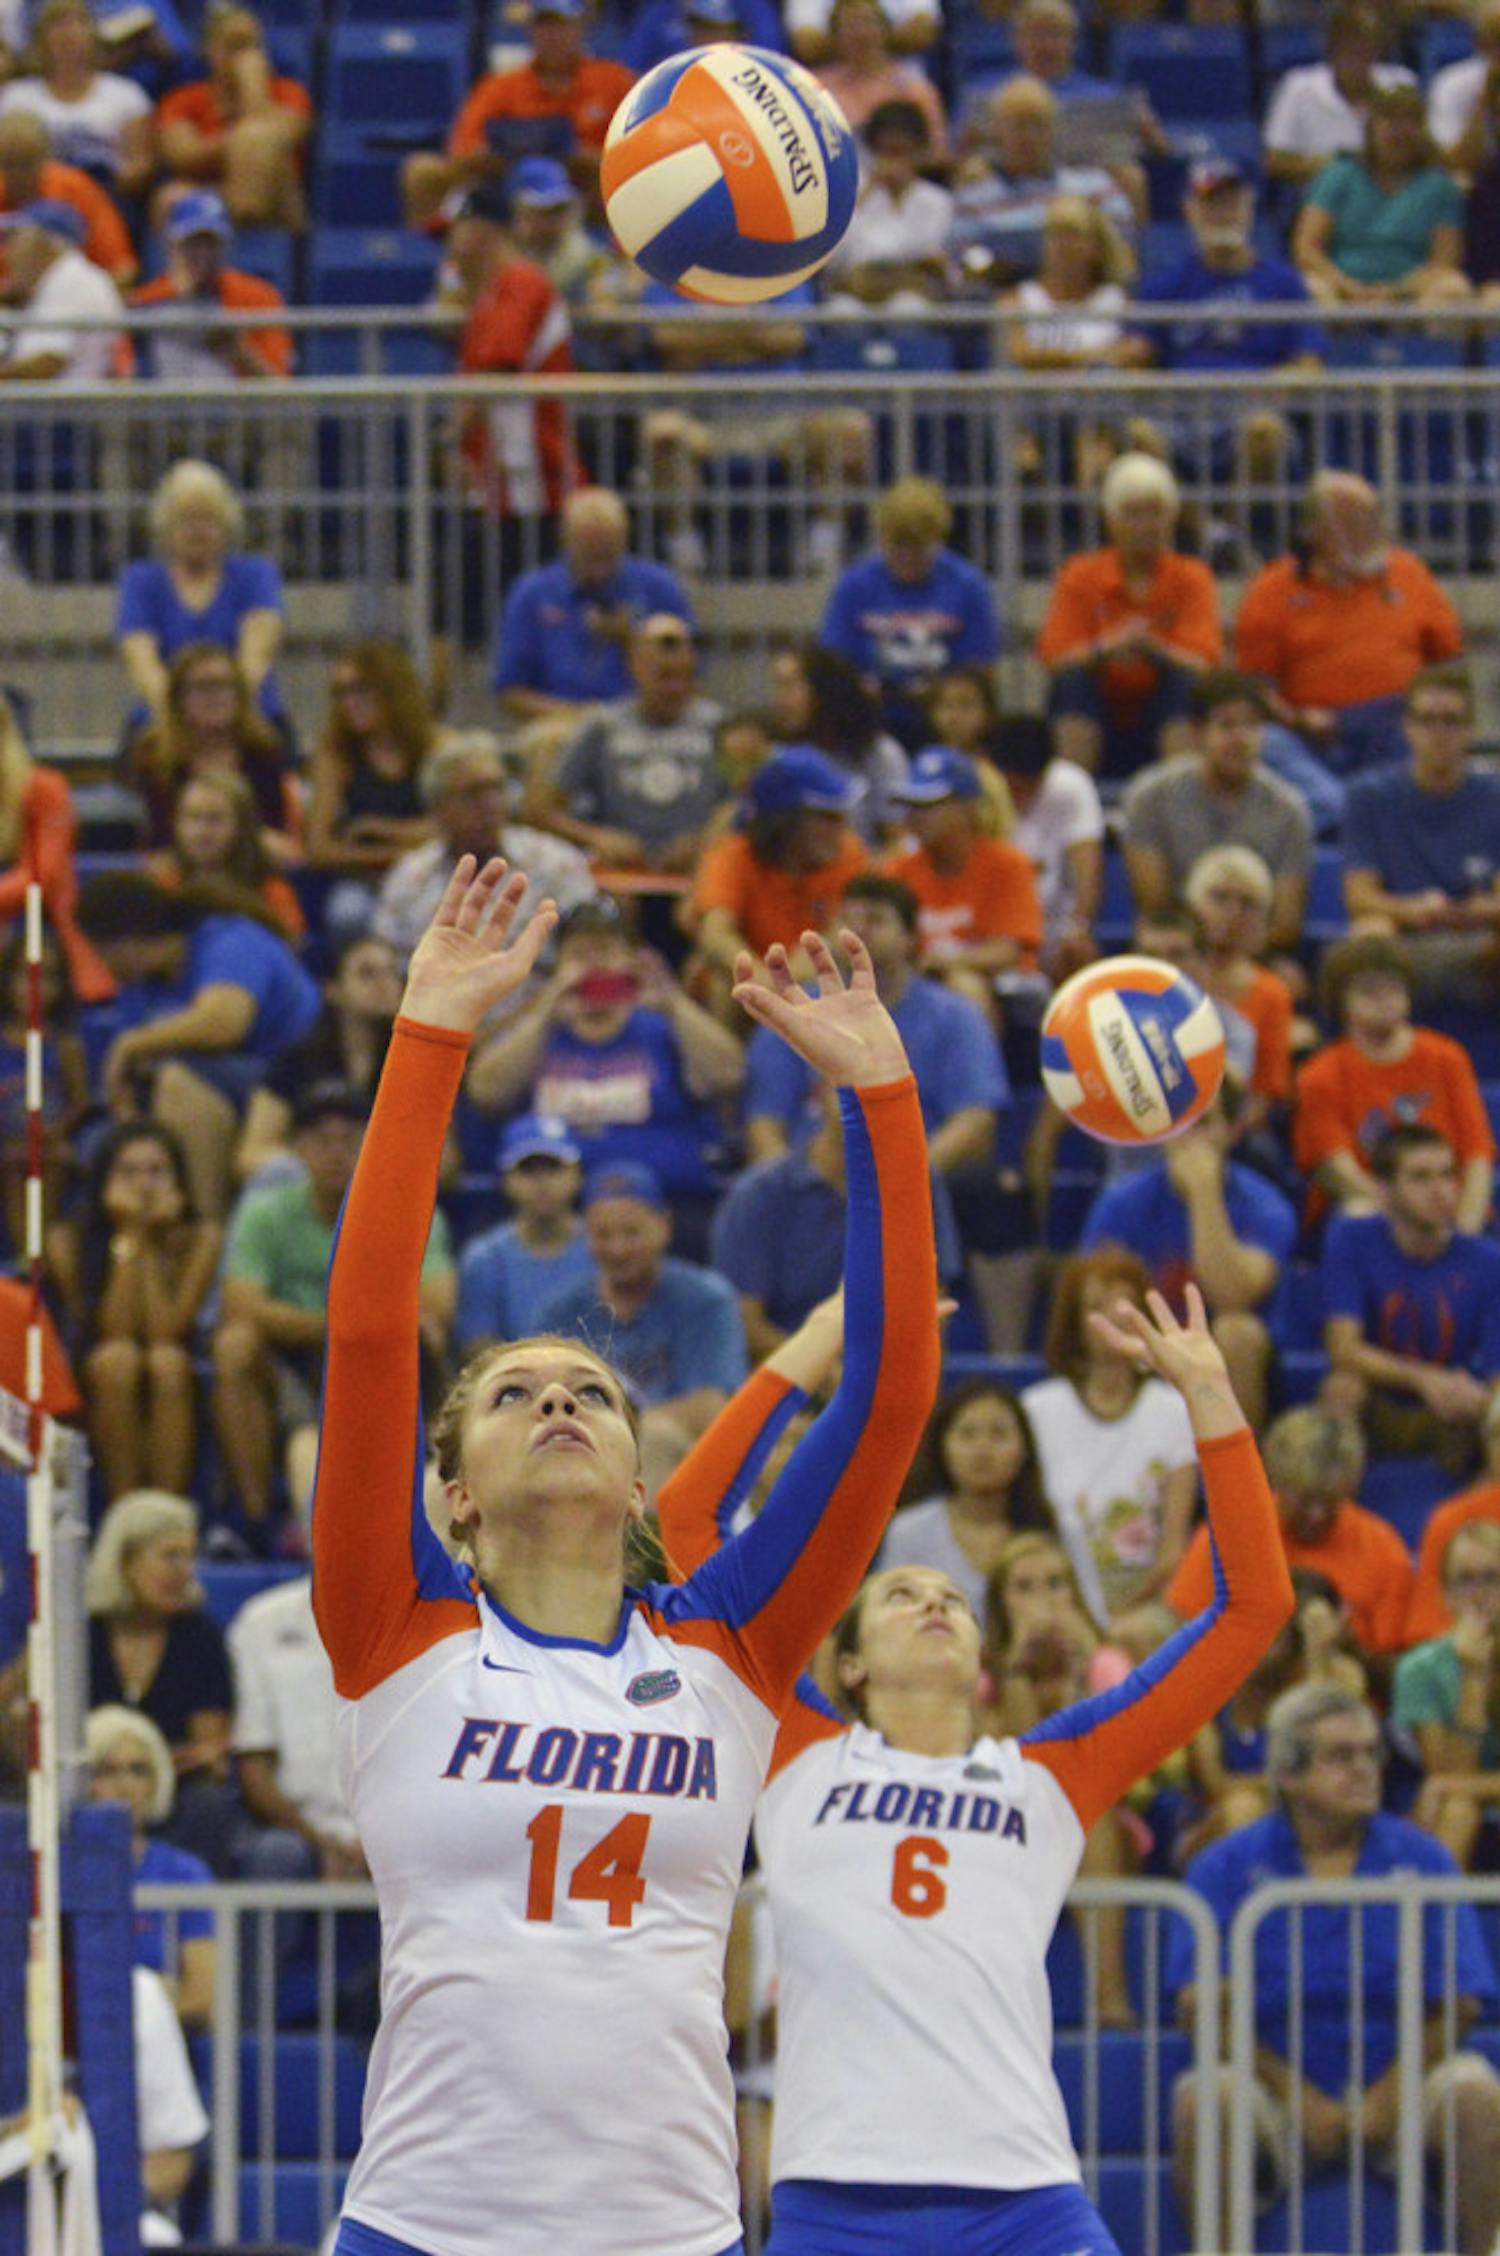 Abby Detering (14) sets the ball during warmups before Florida's 3-0 win against Georgia on Oct. 10, 2014, in the O'Connell Center.